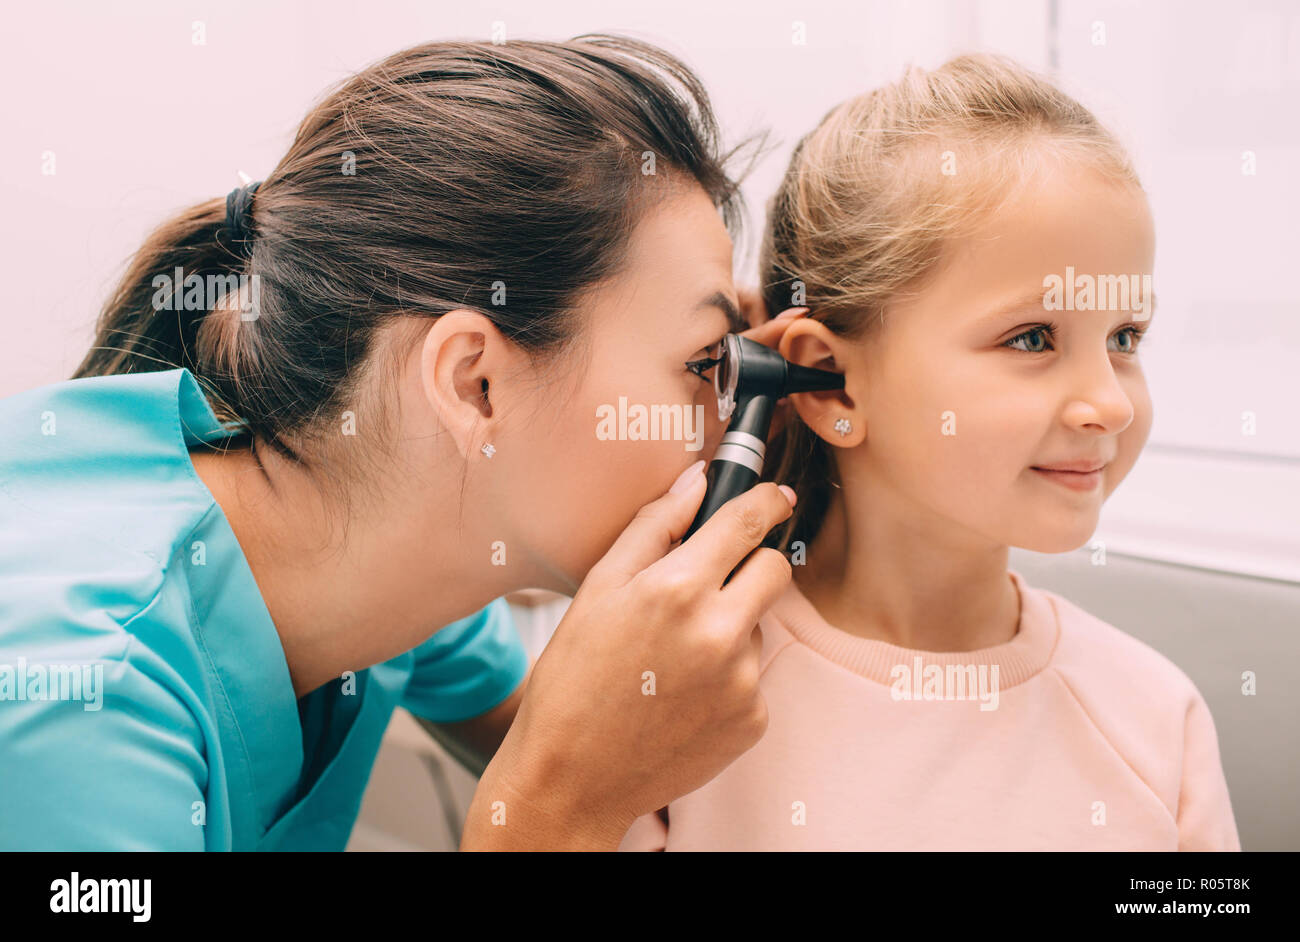 doctor check a girl's ears with otoscope Stock Photo